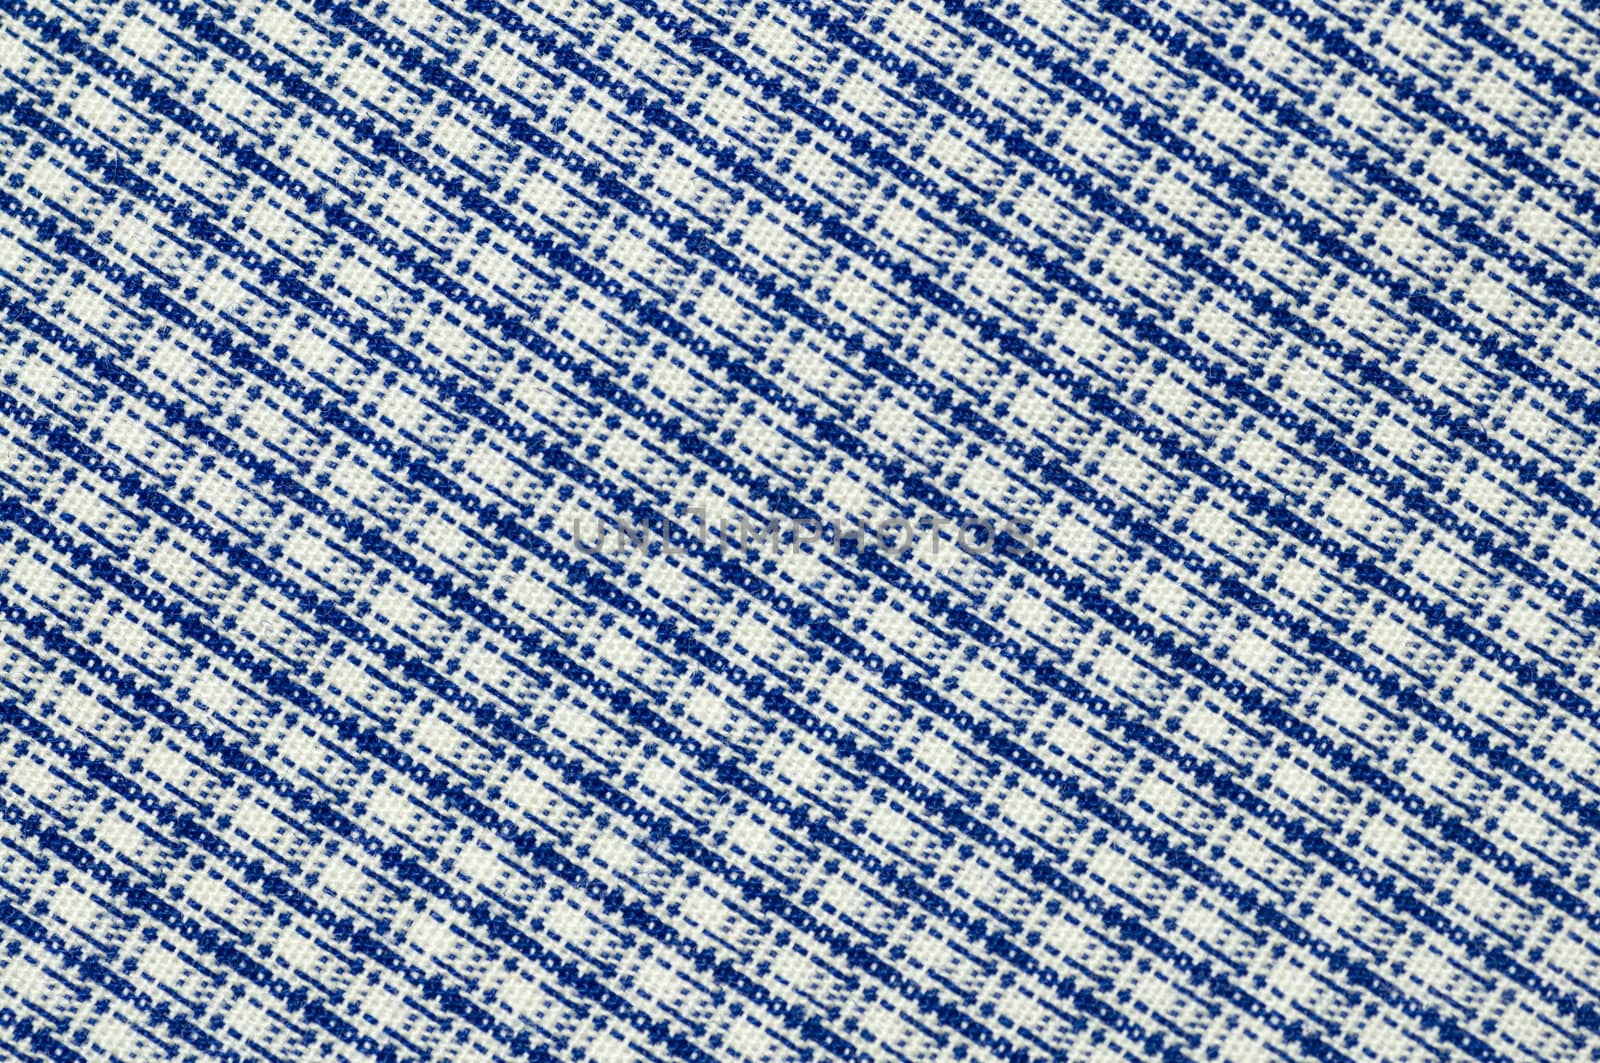 Real gridded fabric. by szefei